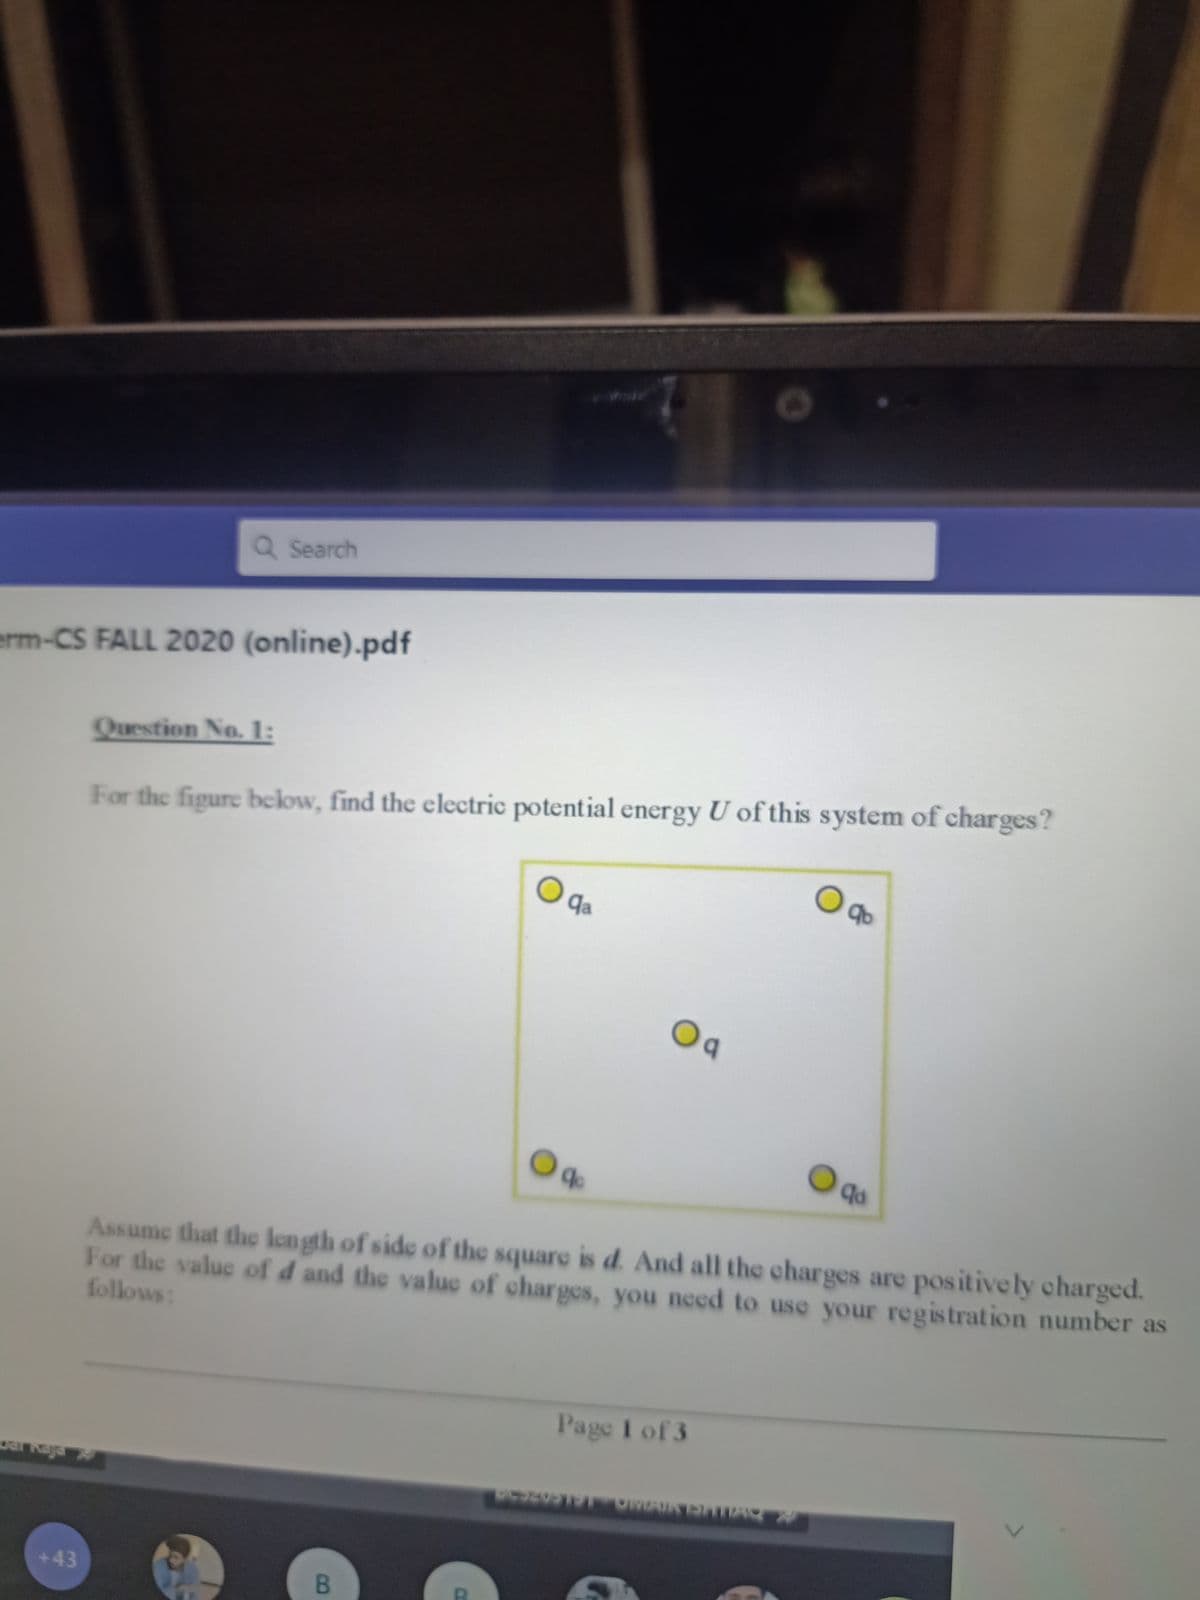 Q Search
erm-CS FALL 2020 (online).pdf
Question No.1:
For the figure beclow, find the electric potential energy U of this system of charges?
O da
Oa
Assume that the length of side of the square is d. And all the charges are positively charged.
For the value of d and the value of charges, you need to use your registration number as
follows:
Page I of 3
+43
